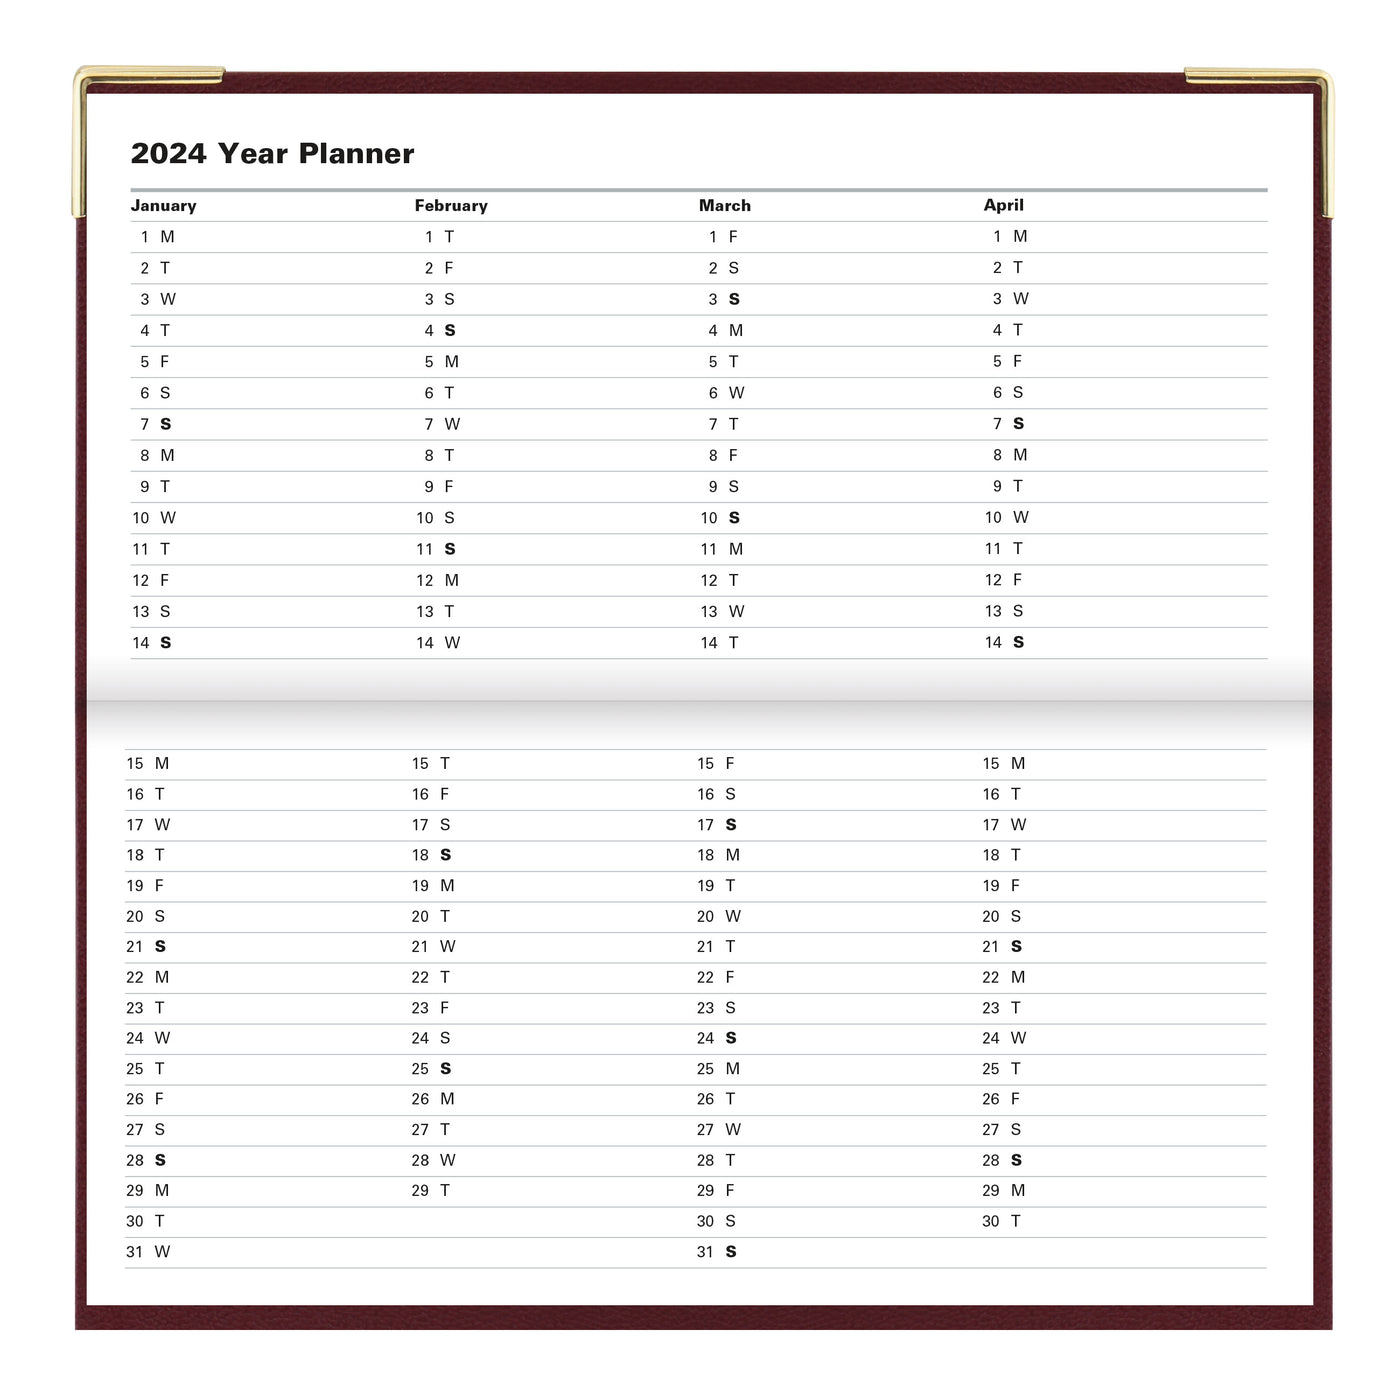 Letts Classic Week to View Horizontal Planner - 6 5/8" x 3 1/4" - Burgundy